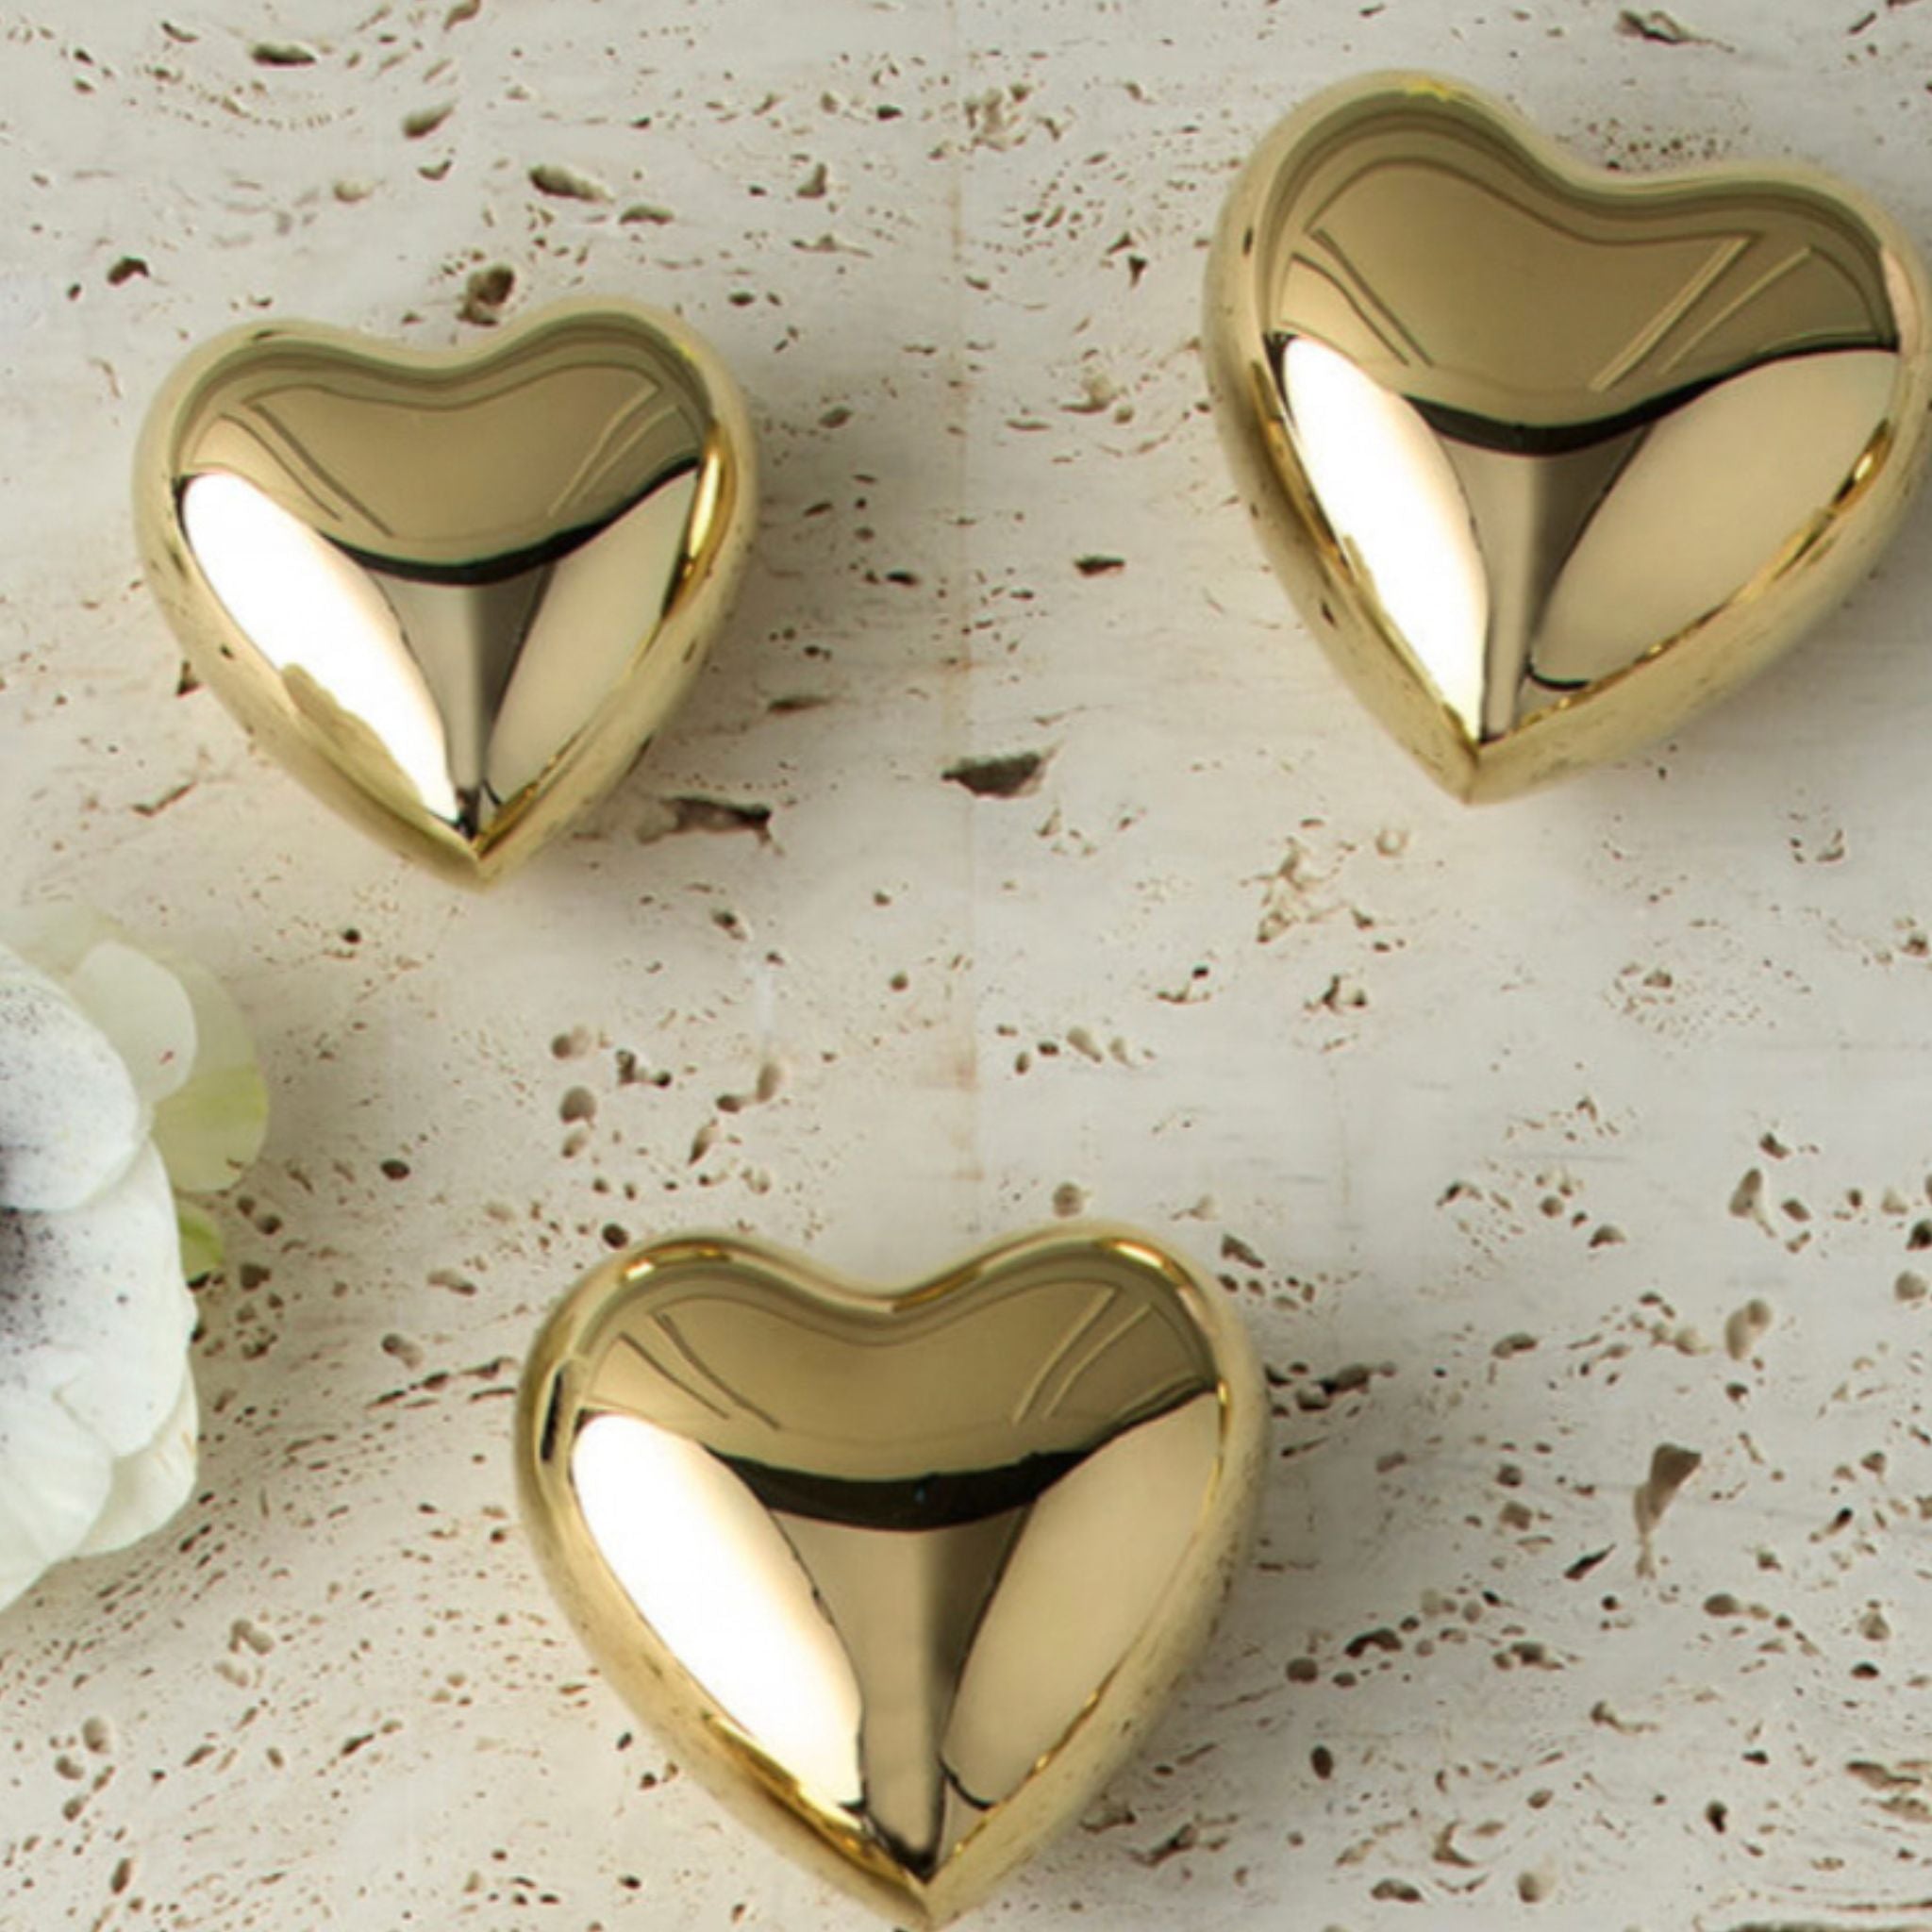 three brass heart shaped objects on a stone surface